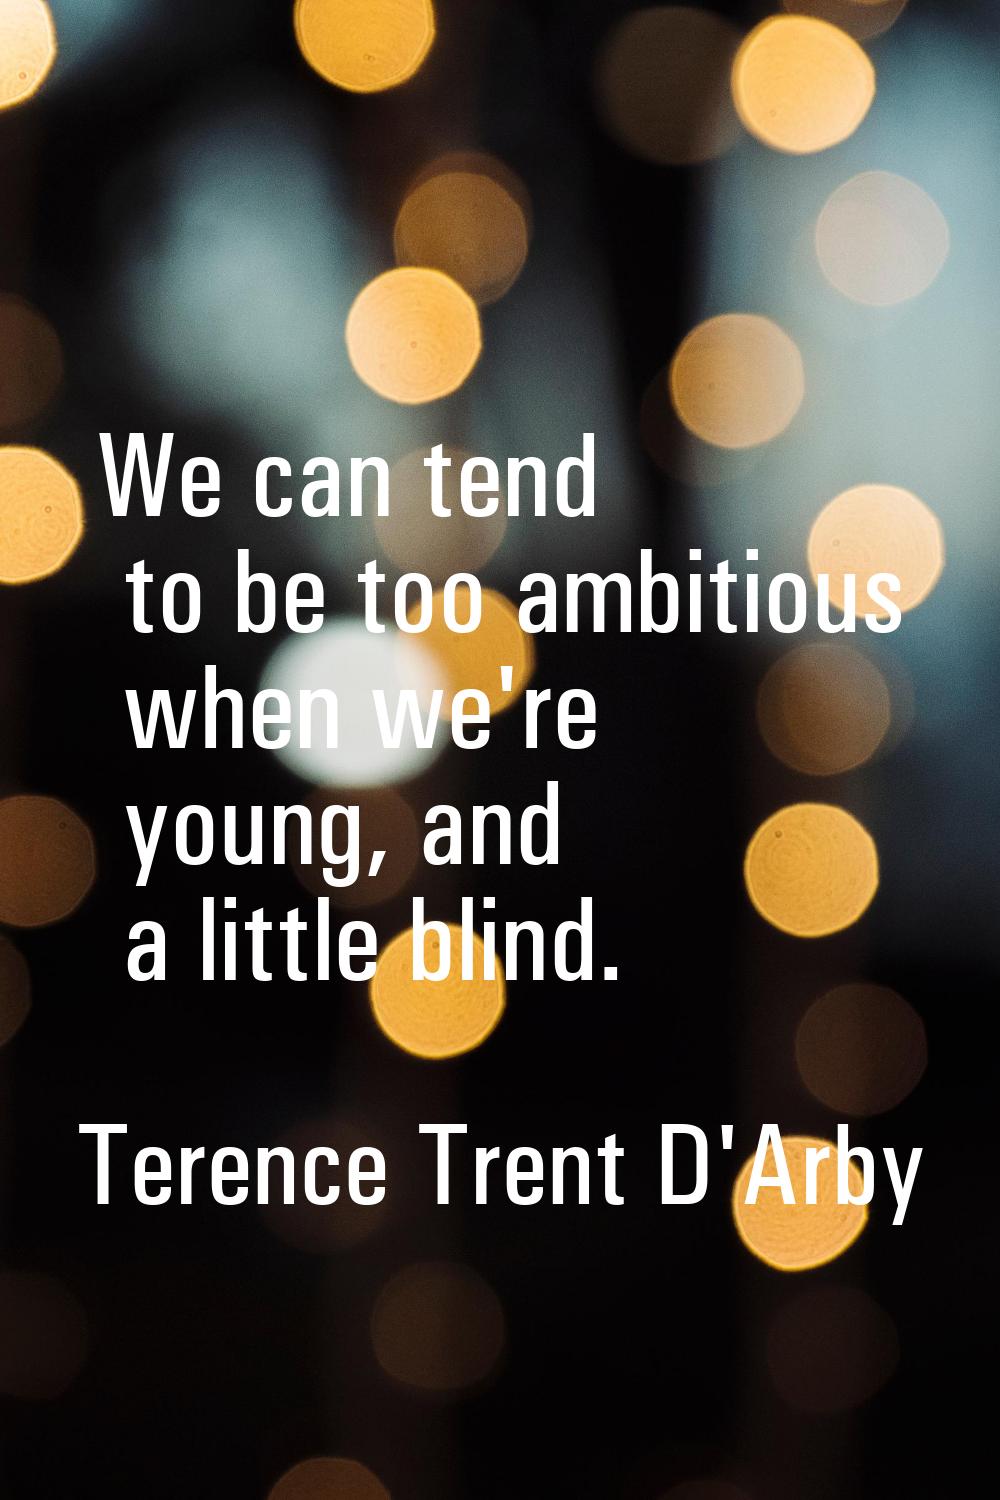 We can tend to be too ambitious when we're young, and a little blind.